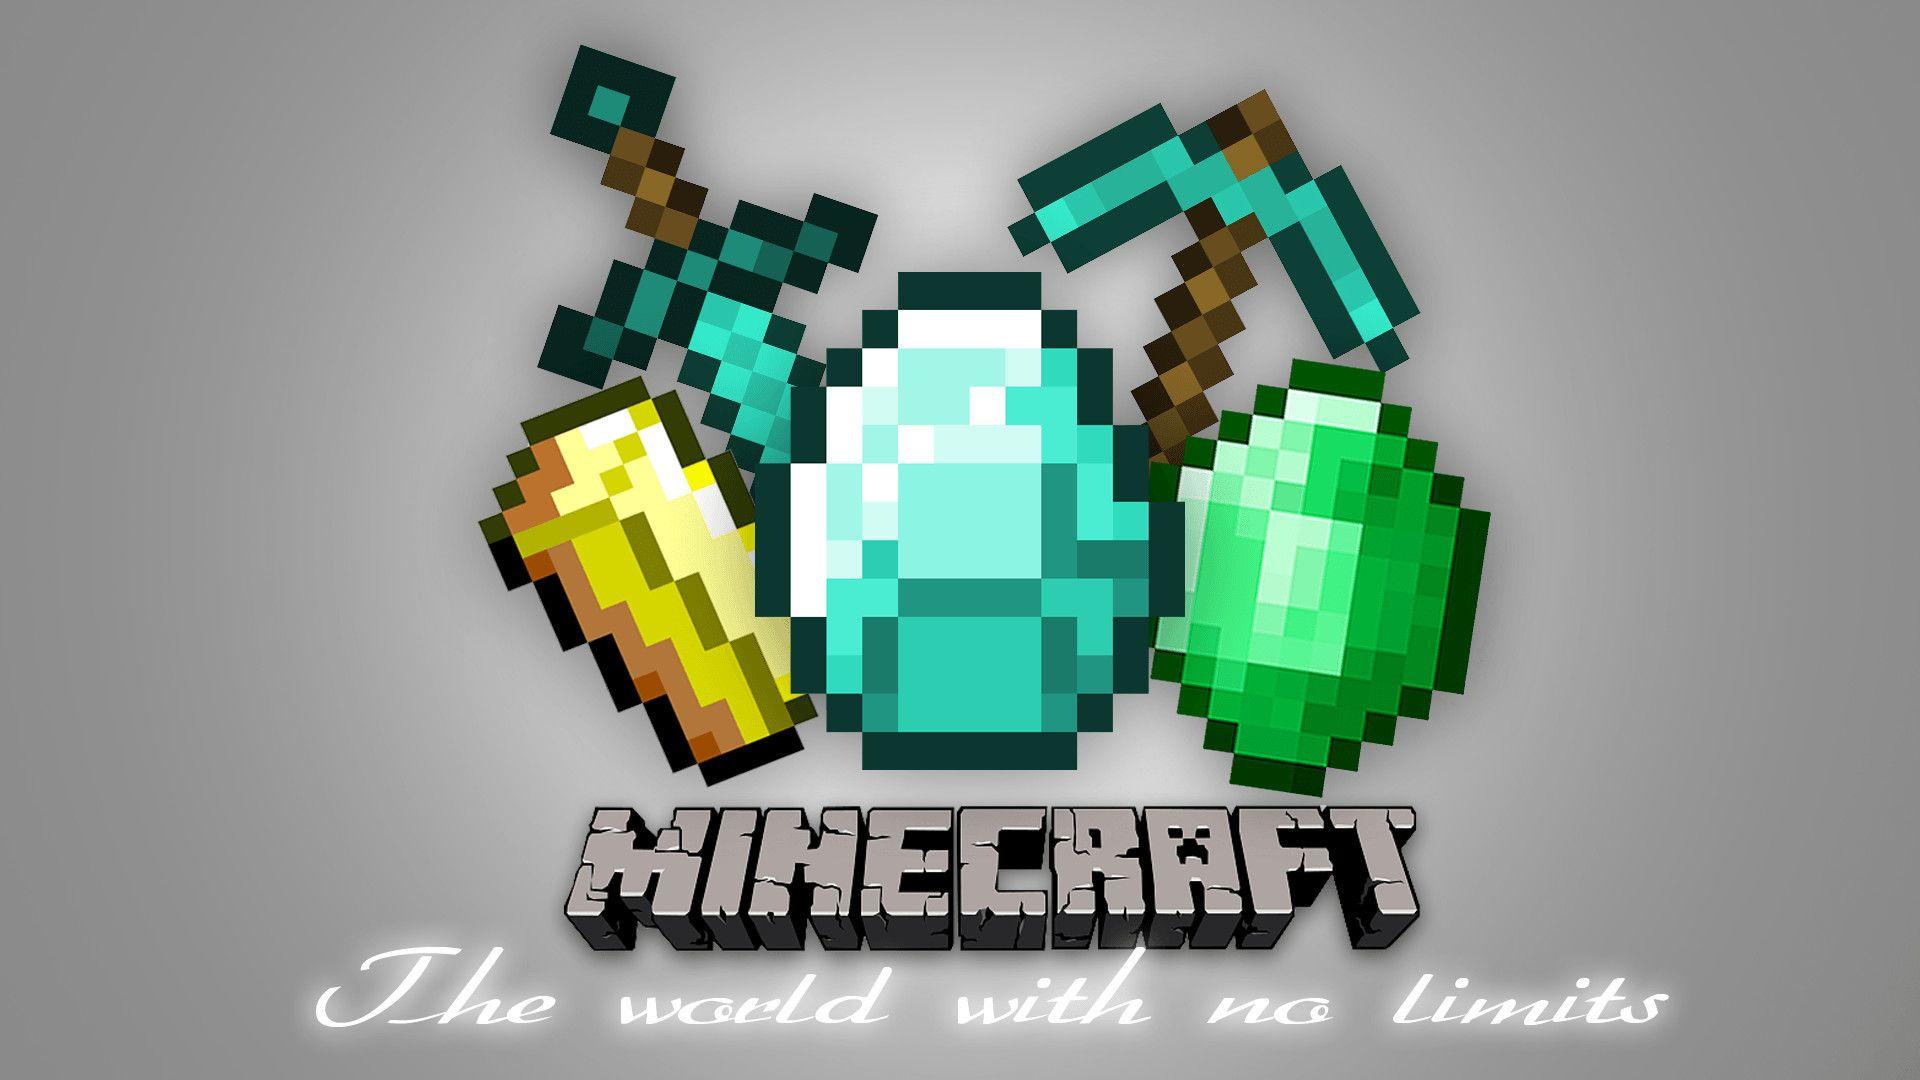 320x240 Resolution Minecraft Dungeons 4K Apple Iphone,iPod Touch,Galaxy Ace  Wallpaper - Wallpapers Den